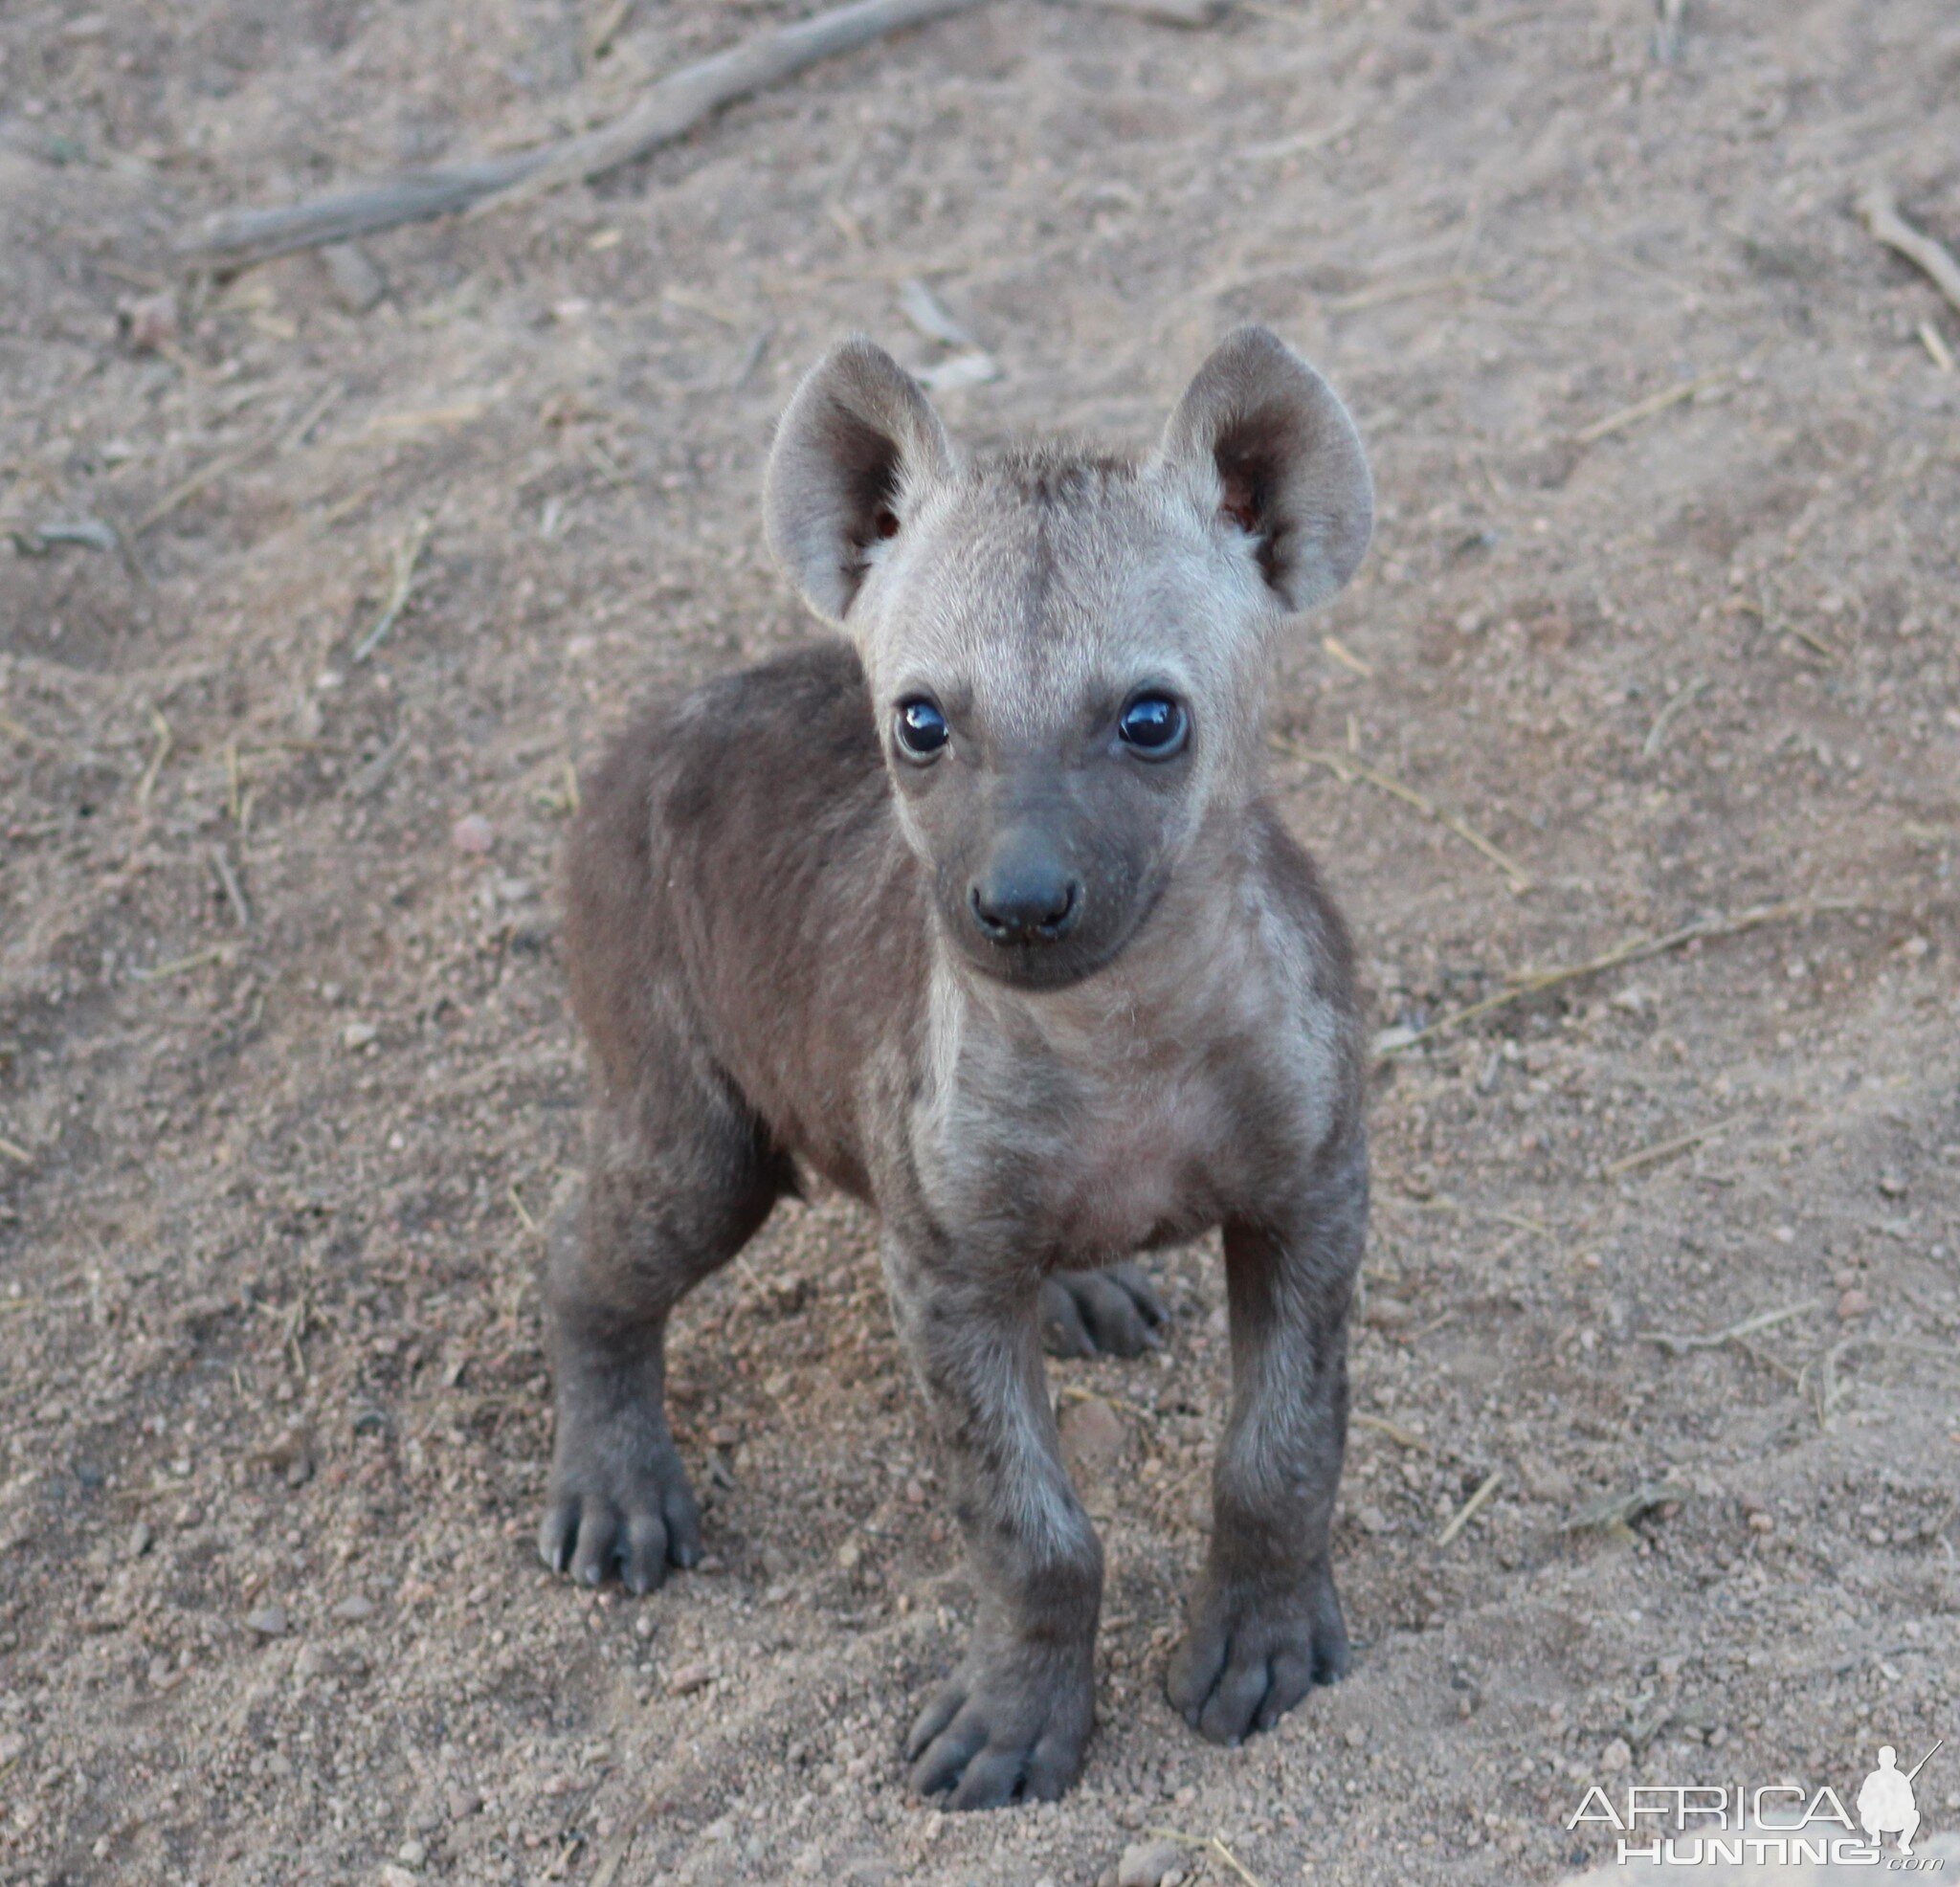 Hyena youngster in the Kruger National Park South Africa